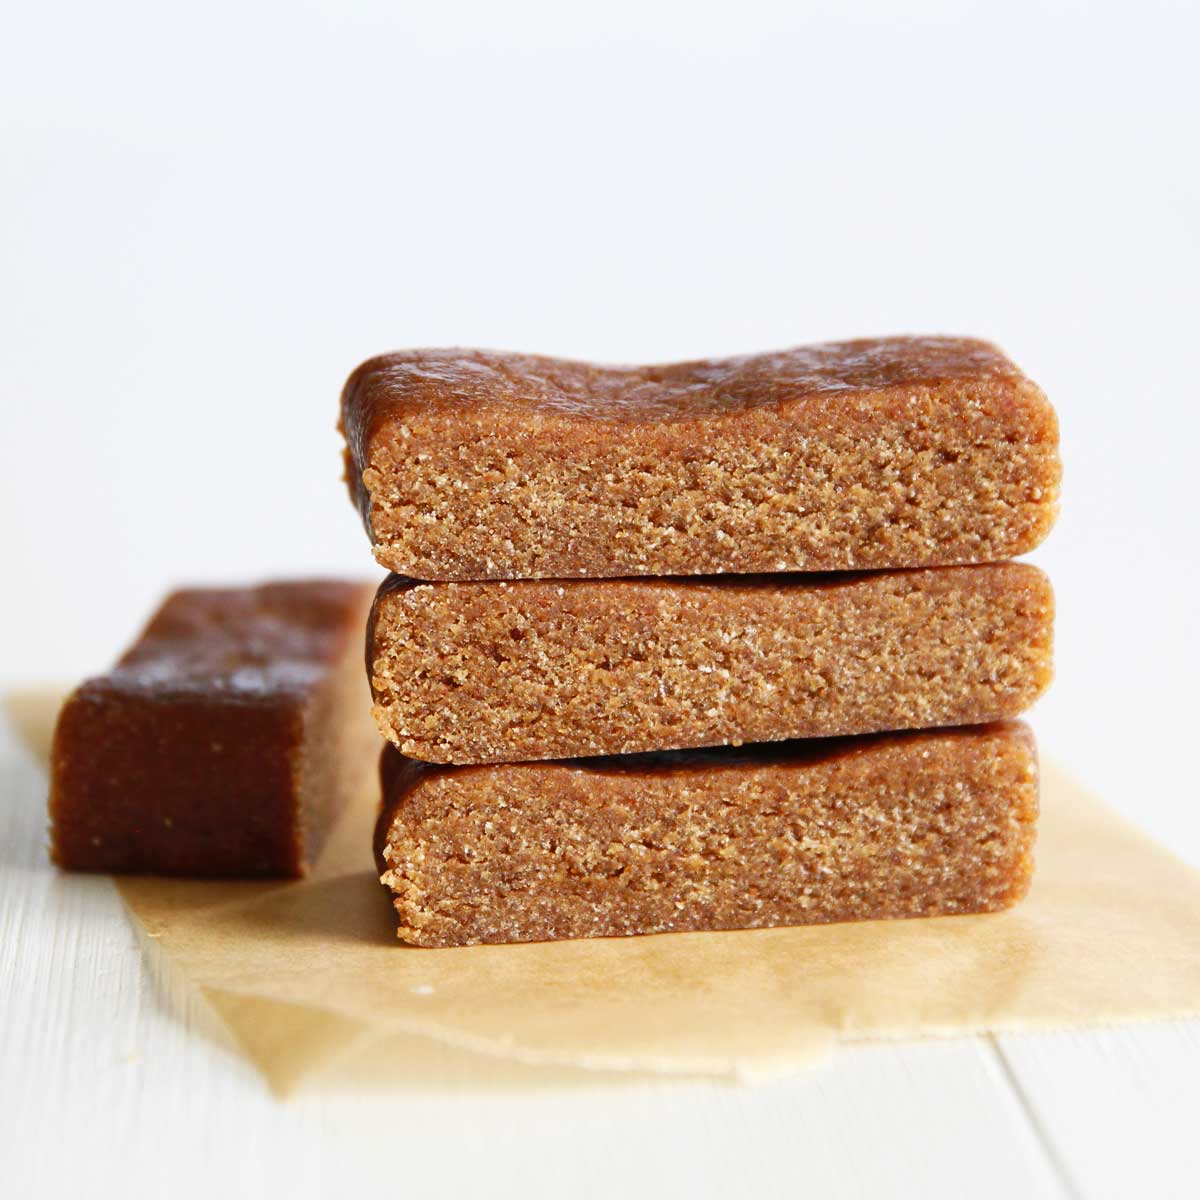 Gingerbread Collagen Protein Bars: a Healthier Festive Snack - yeast bread